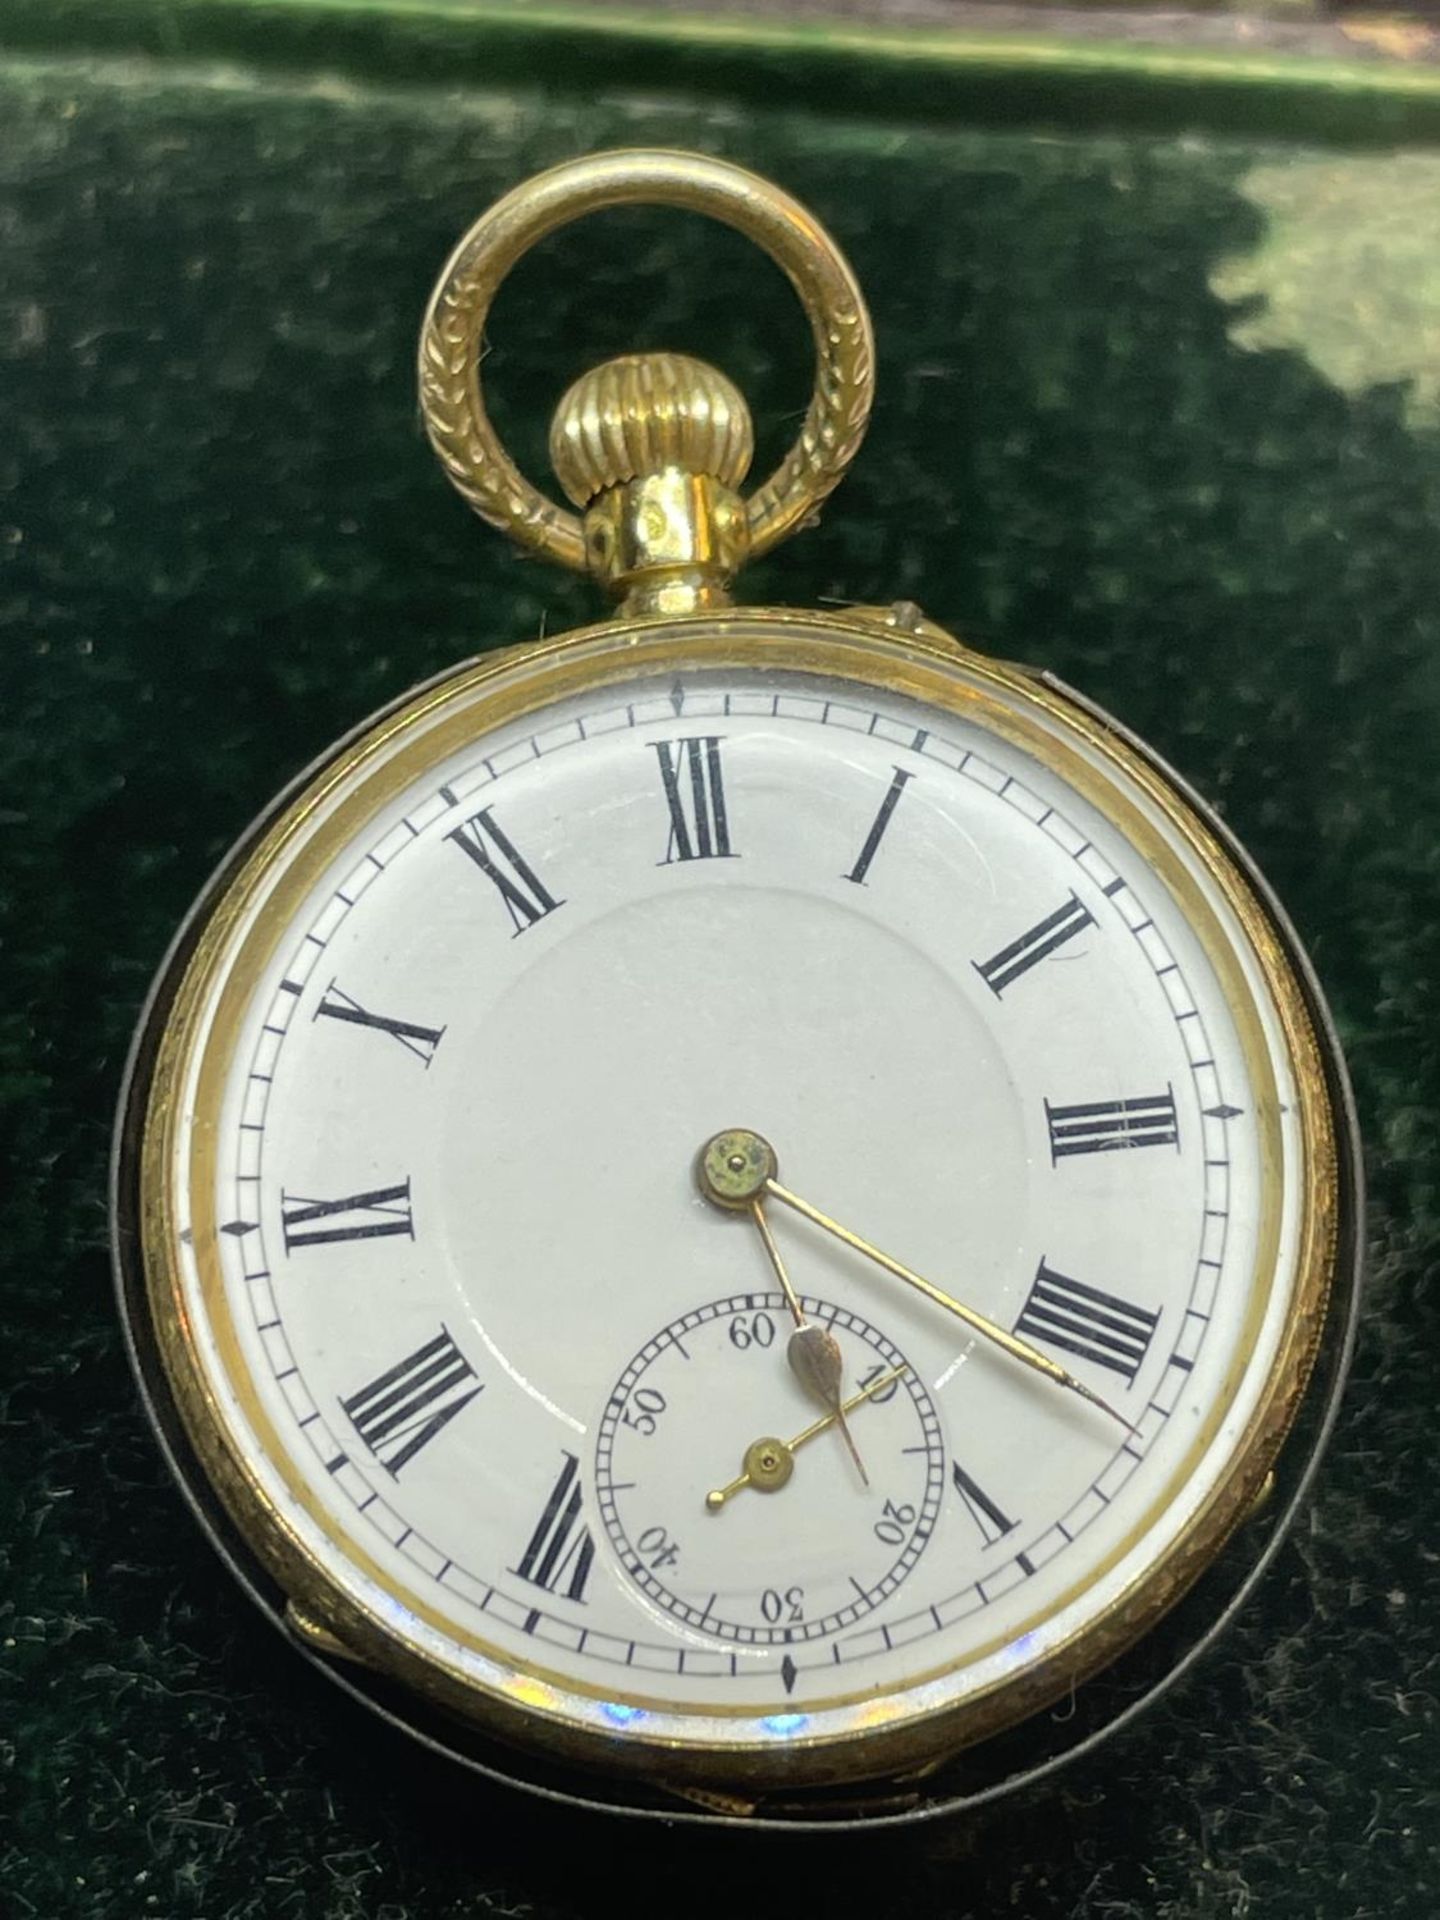 AN 18CT GOLD TOP WIND POCKET WATCH WITH WHITE ENAMELLED DIAL AND GOLD HANDS, WITH ORIGINAL BOX - Image 2 of 7